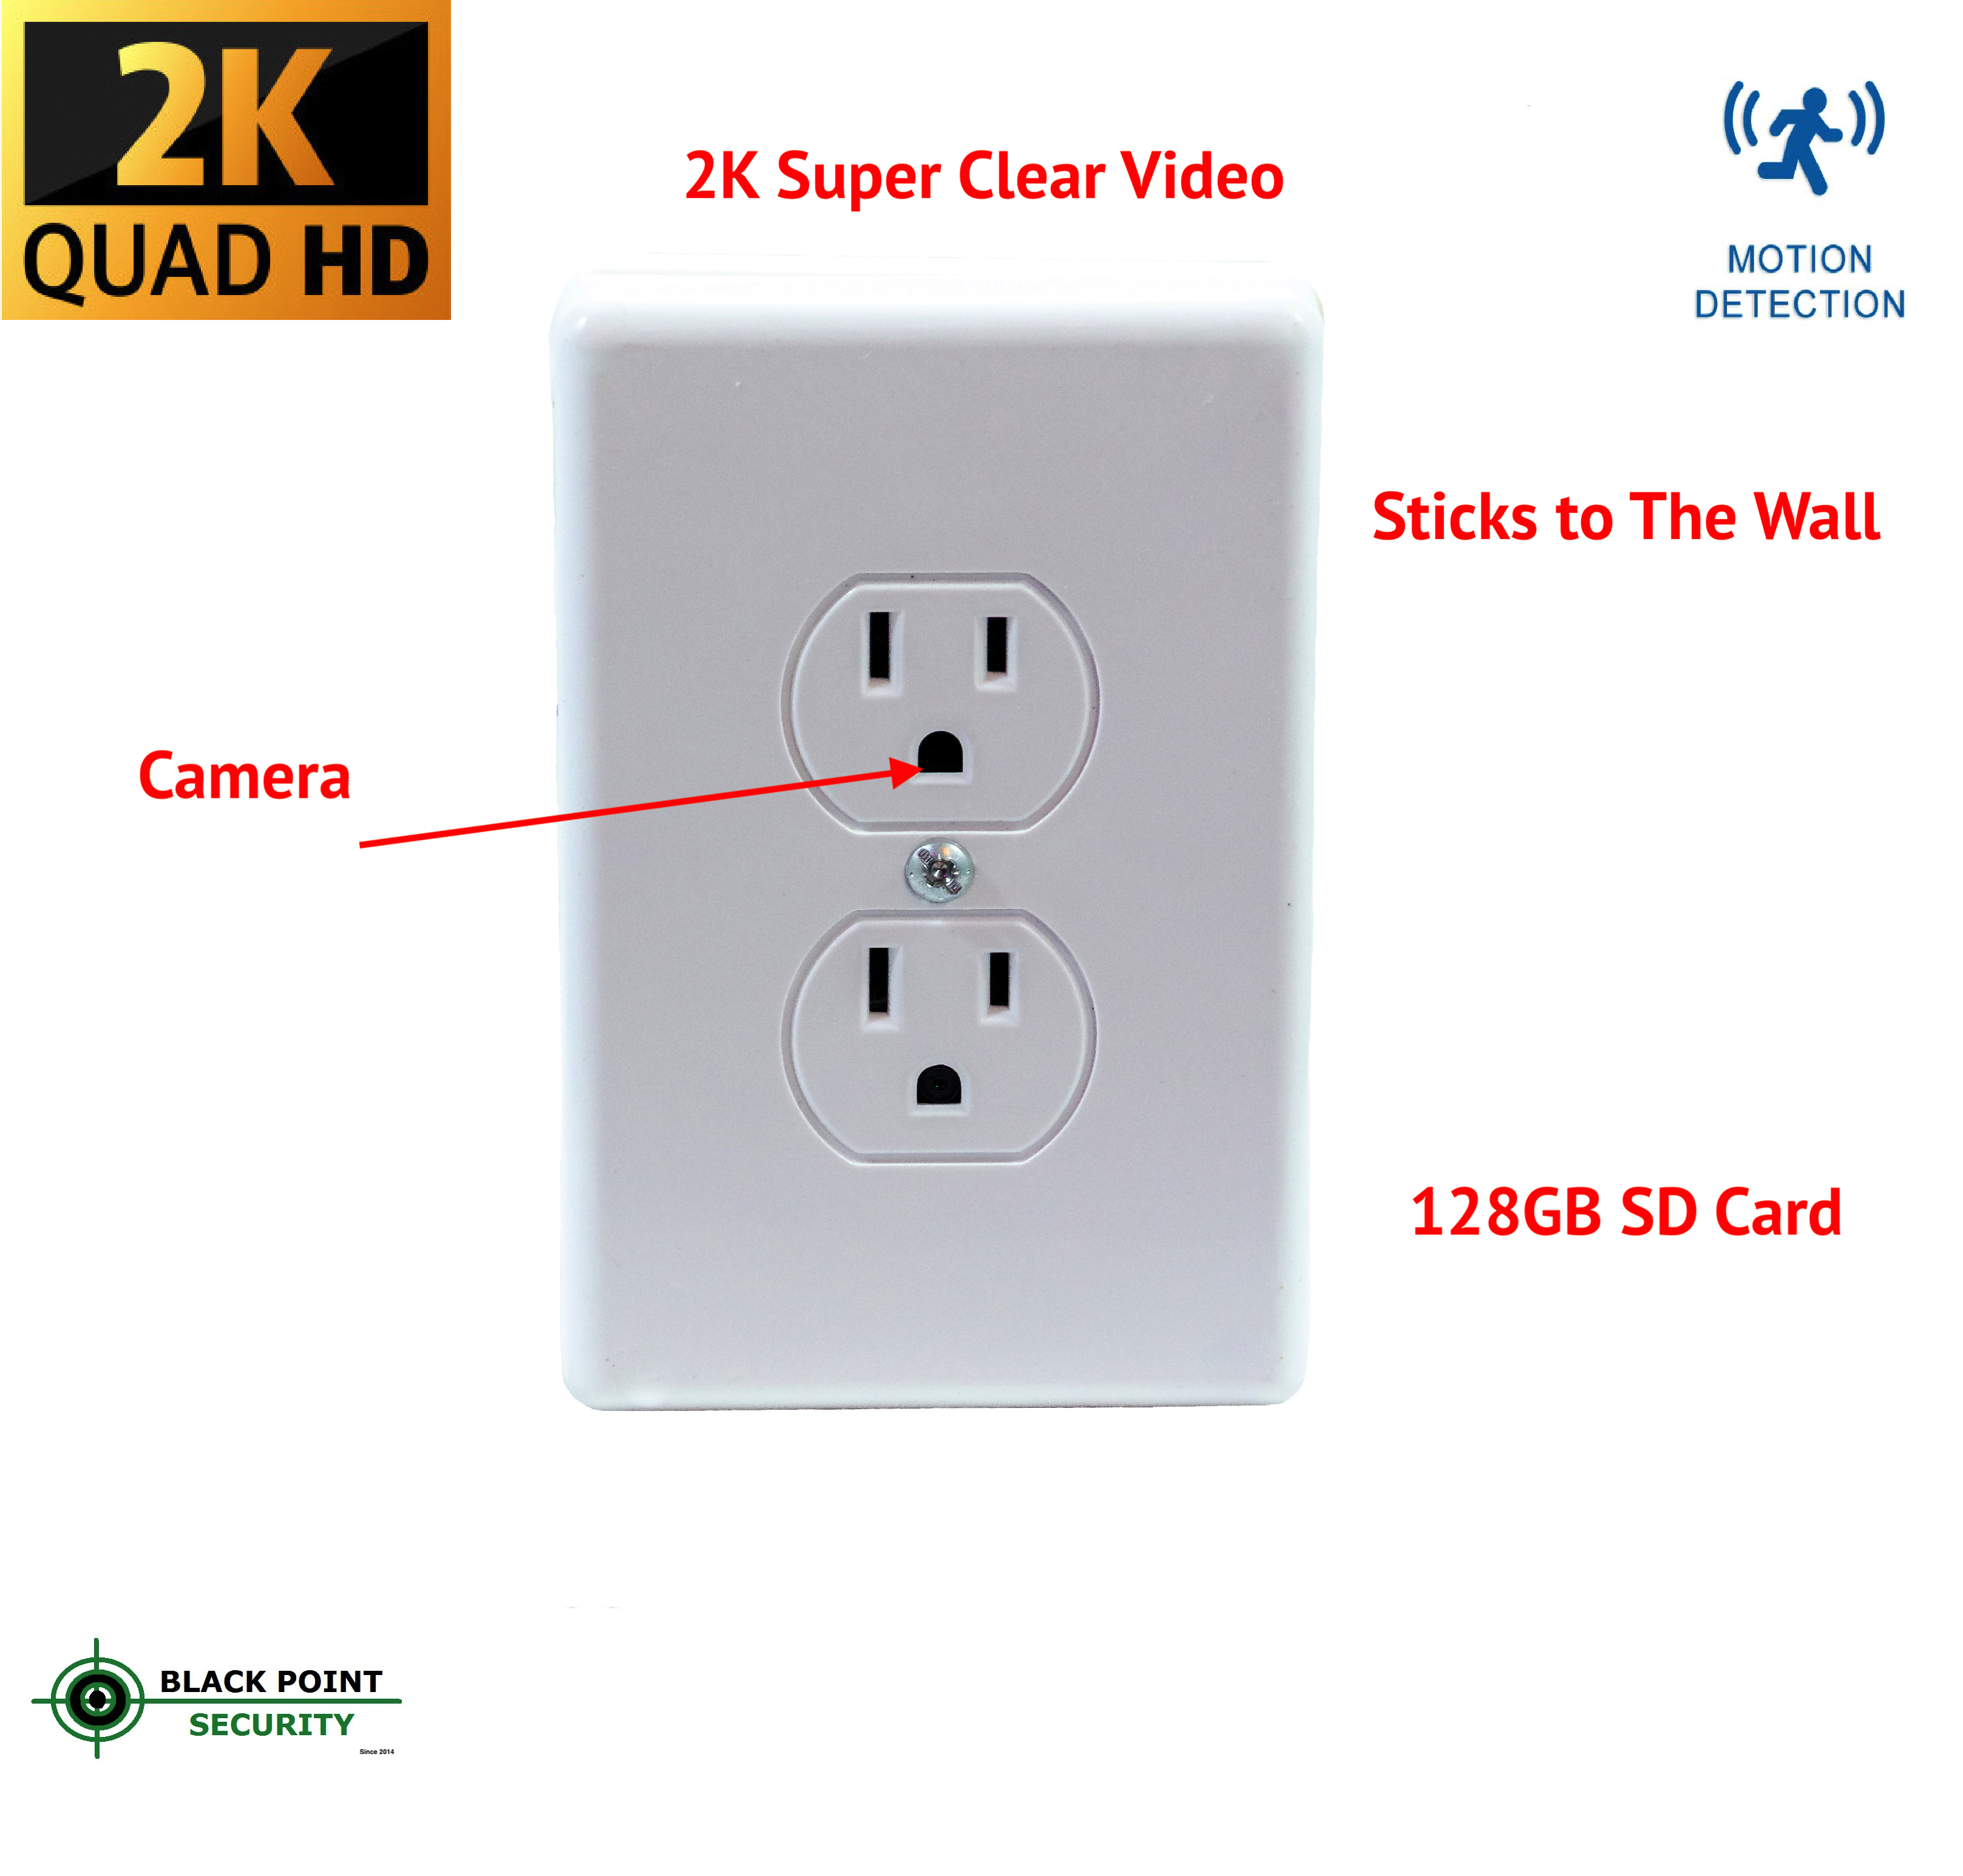 Battery Operated Outlet Hidden 2K Camera which Sticks on the wall